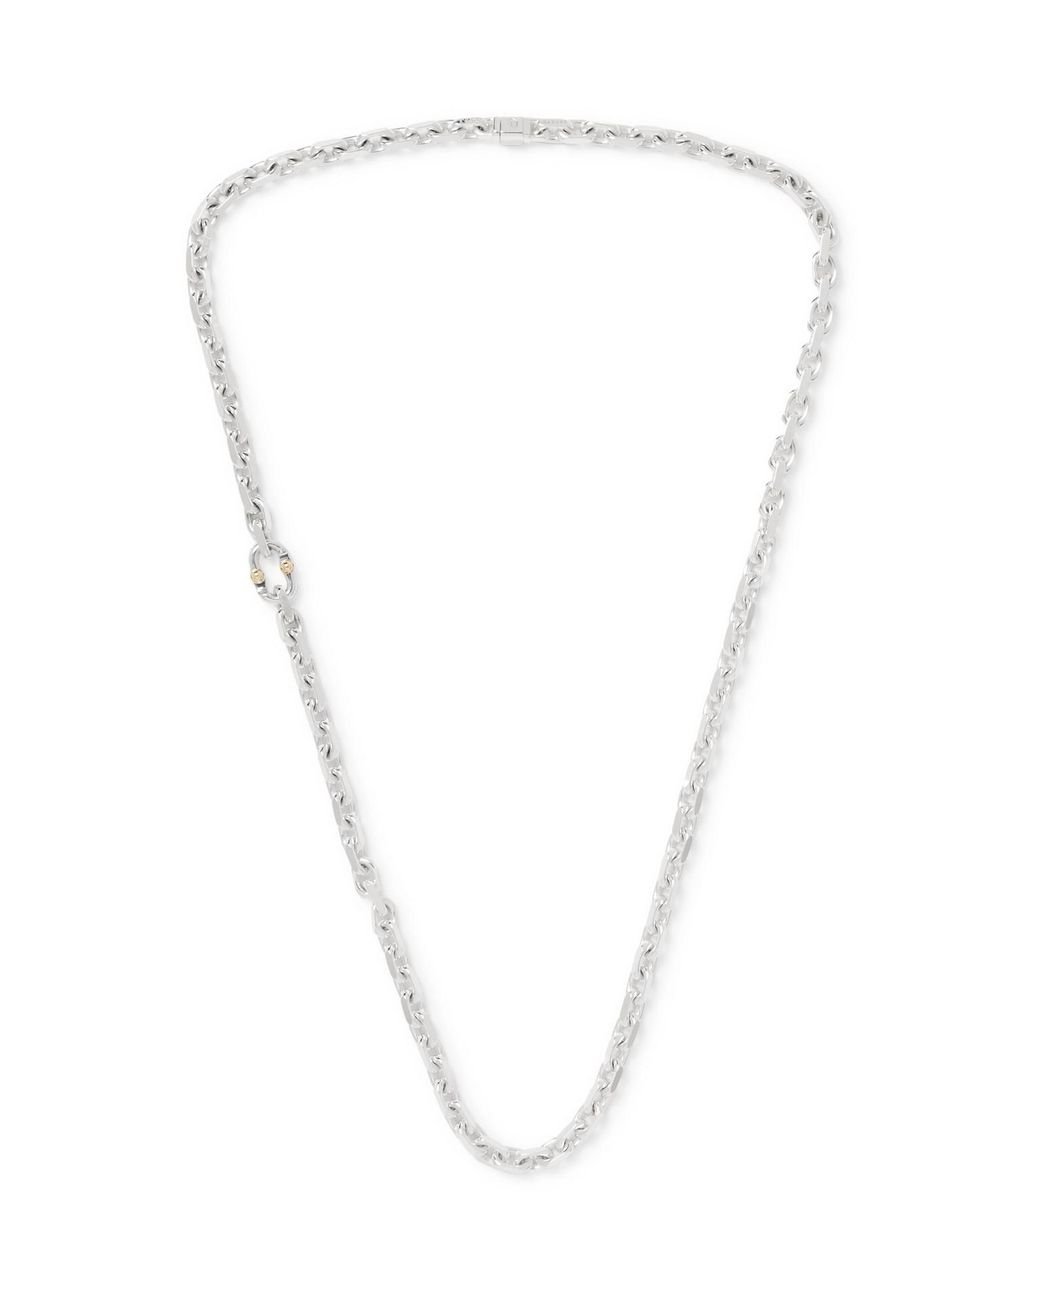 Tiffany & Co. Return to Tiffany™ Heart Tag Chain Link Necklace in Silver  Necklaces | Heathrow Reserve & Collect